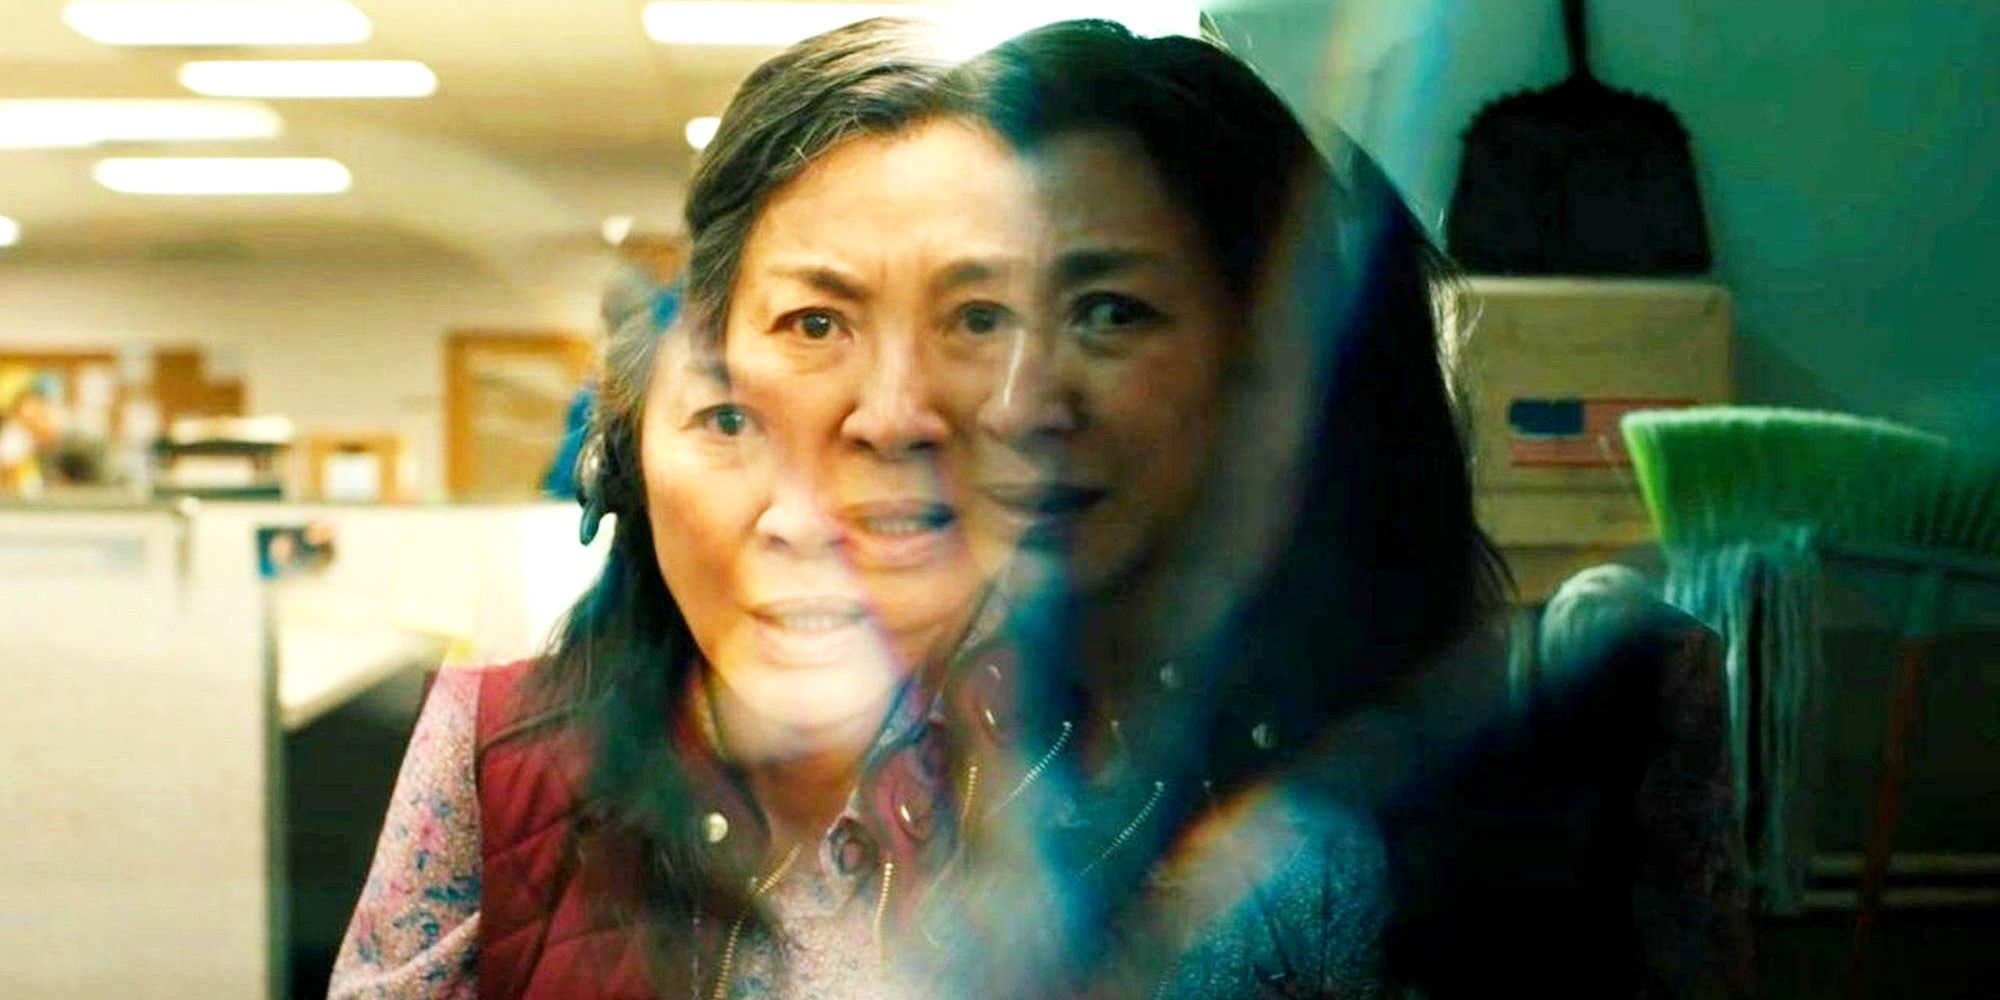 Everything Everywhere All At Once Michelle Yeoh